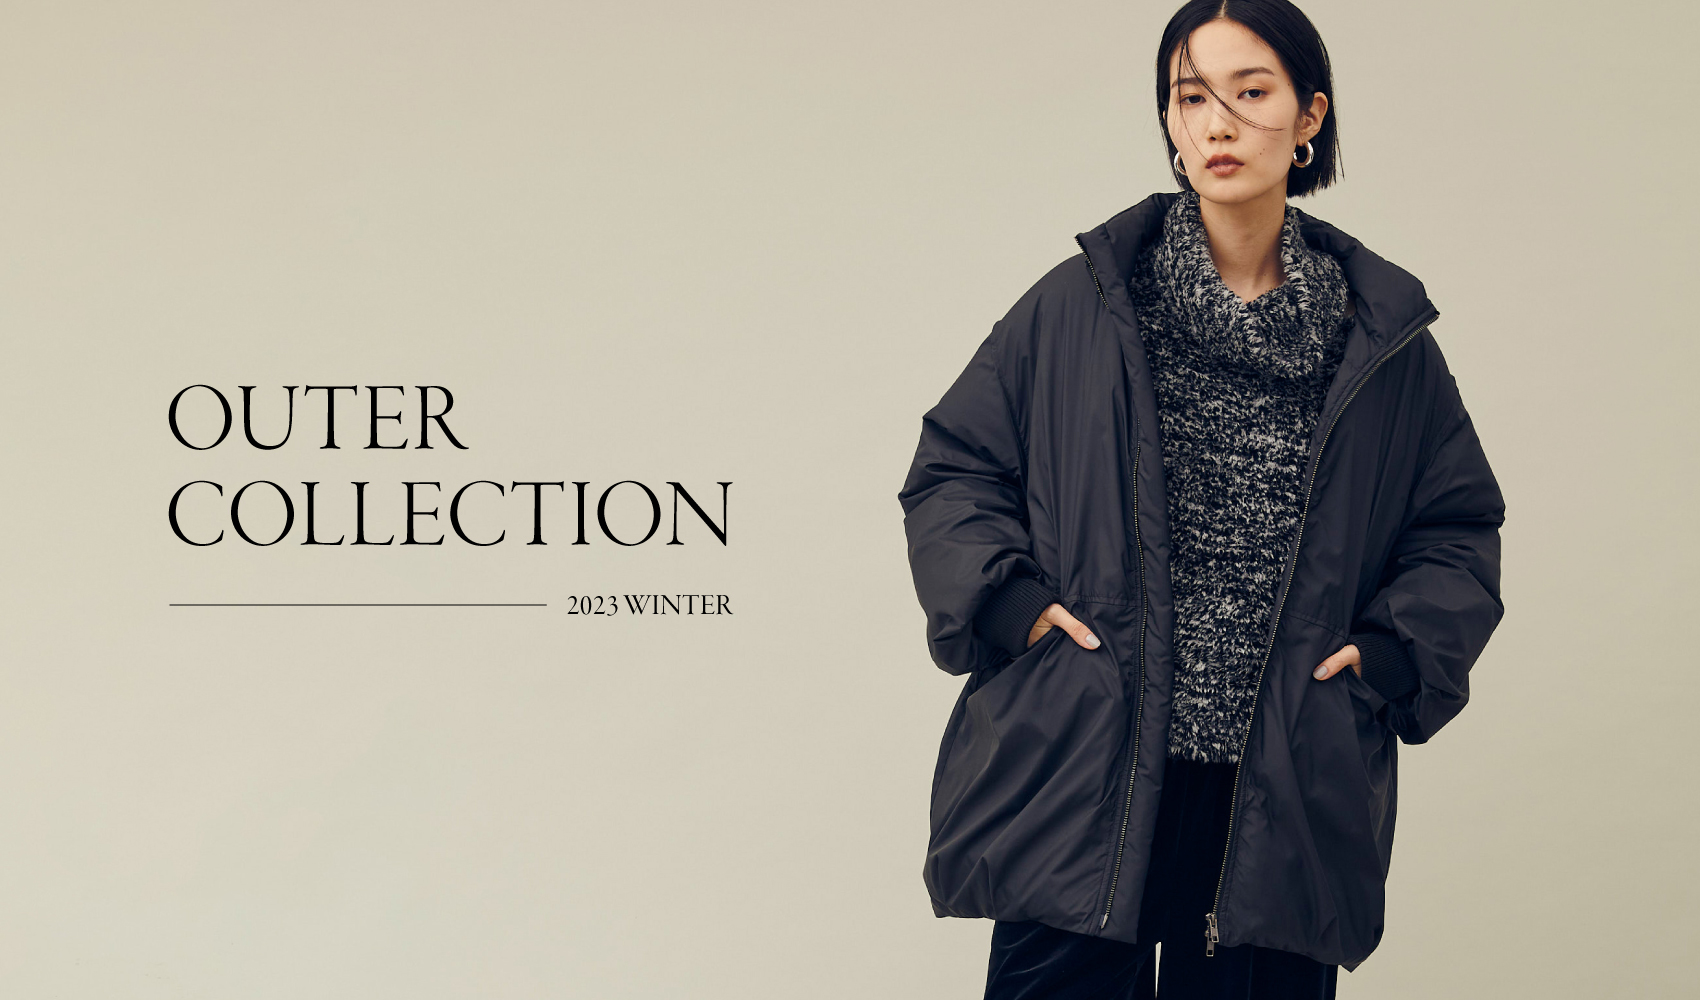 Outer Collection 2023 Winter